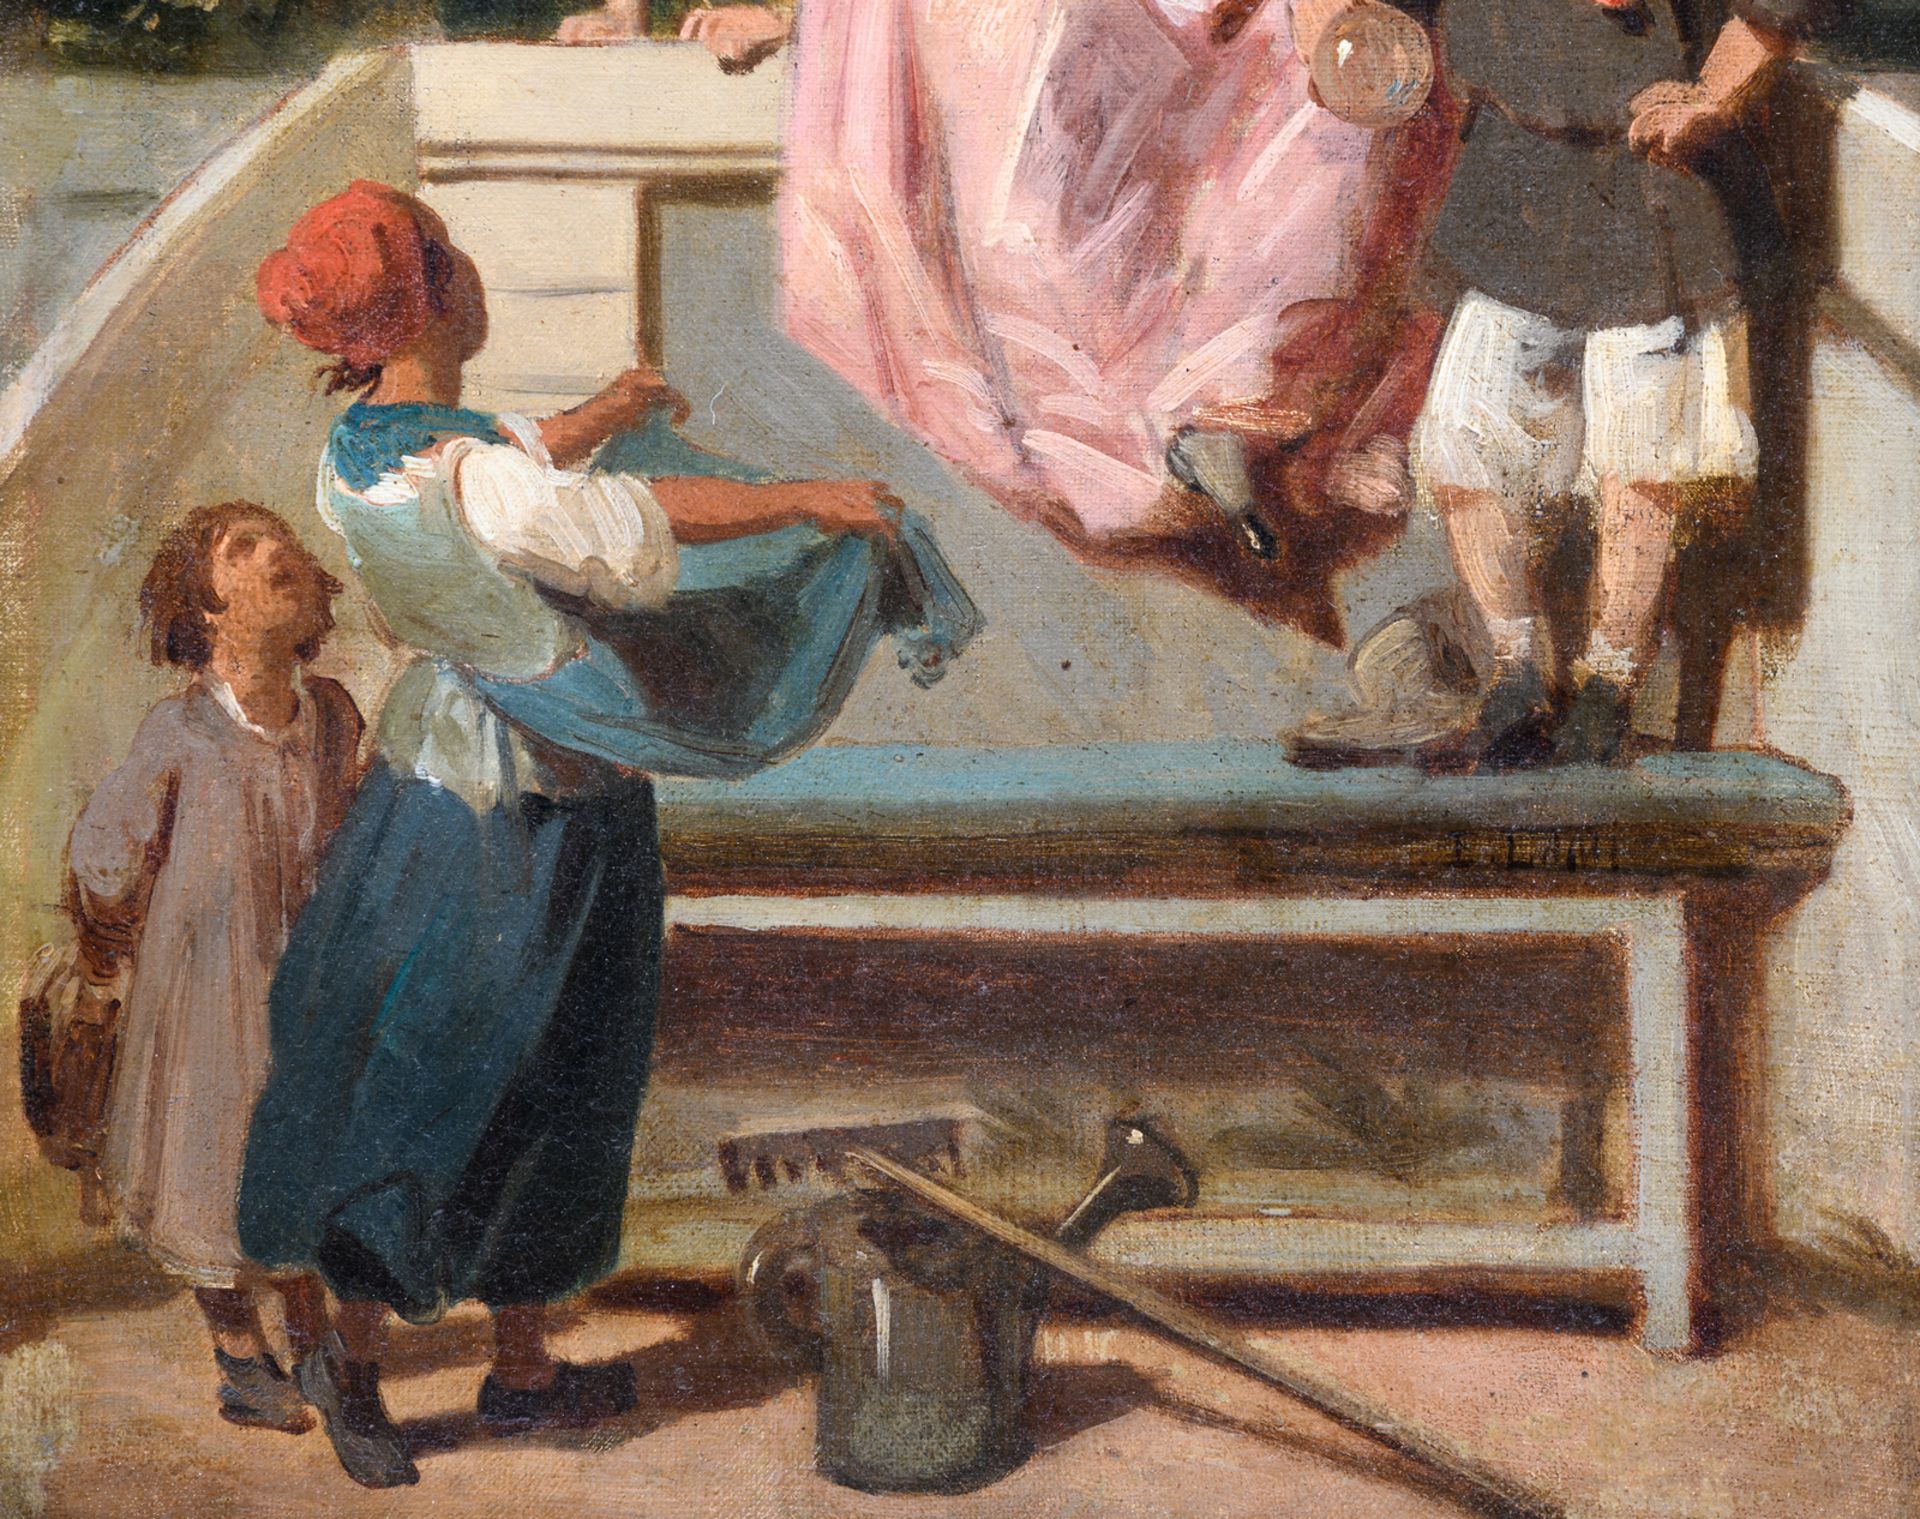 (Lami E.), blowing bubbles, oil on canvas, late 19th - early 20thC, 32 x 41 cm - Image 4 of 4